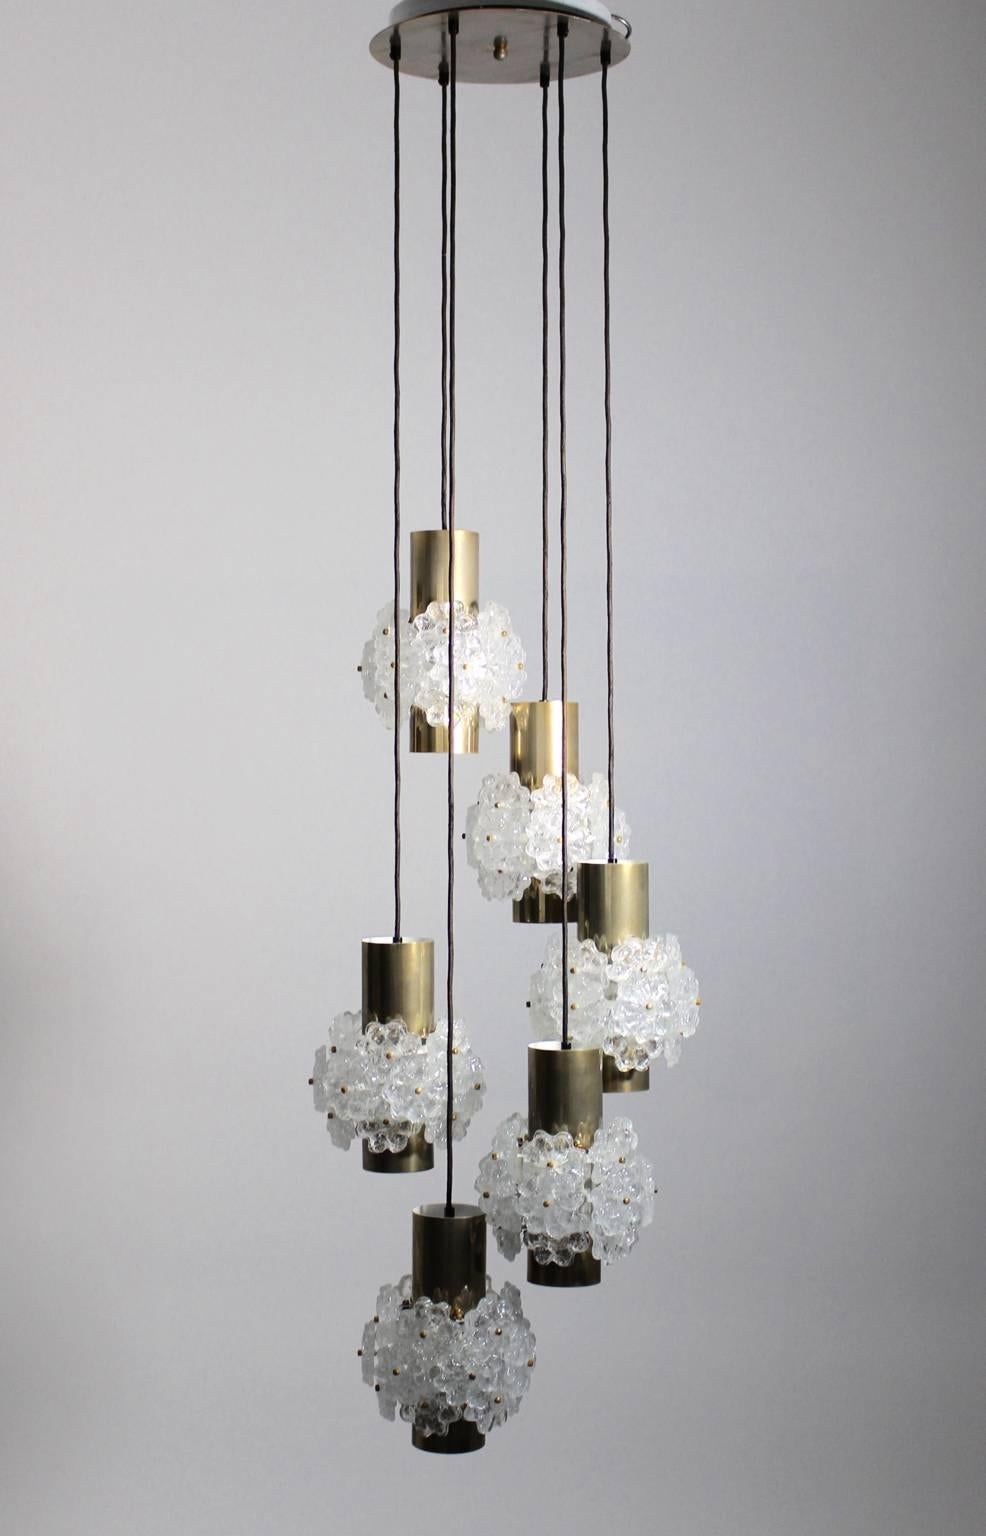 Charming Mid-Century Modern brassed chandelier with six hanging lamps, each decorated with nineteen lucite flowers.
The chandelier features six sockets E 27 and shows a a beautiful patina.
Very good vintage condition
approx. measures:
Diameter 47